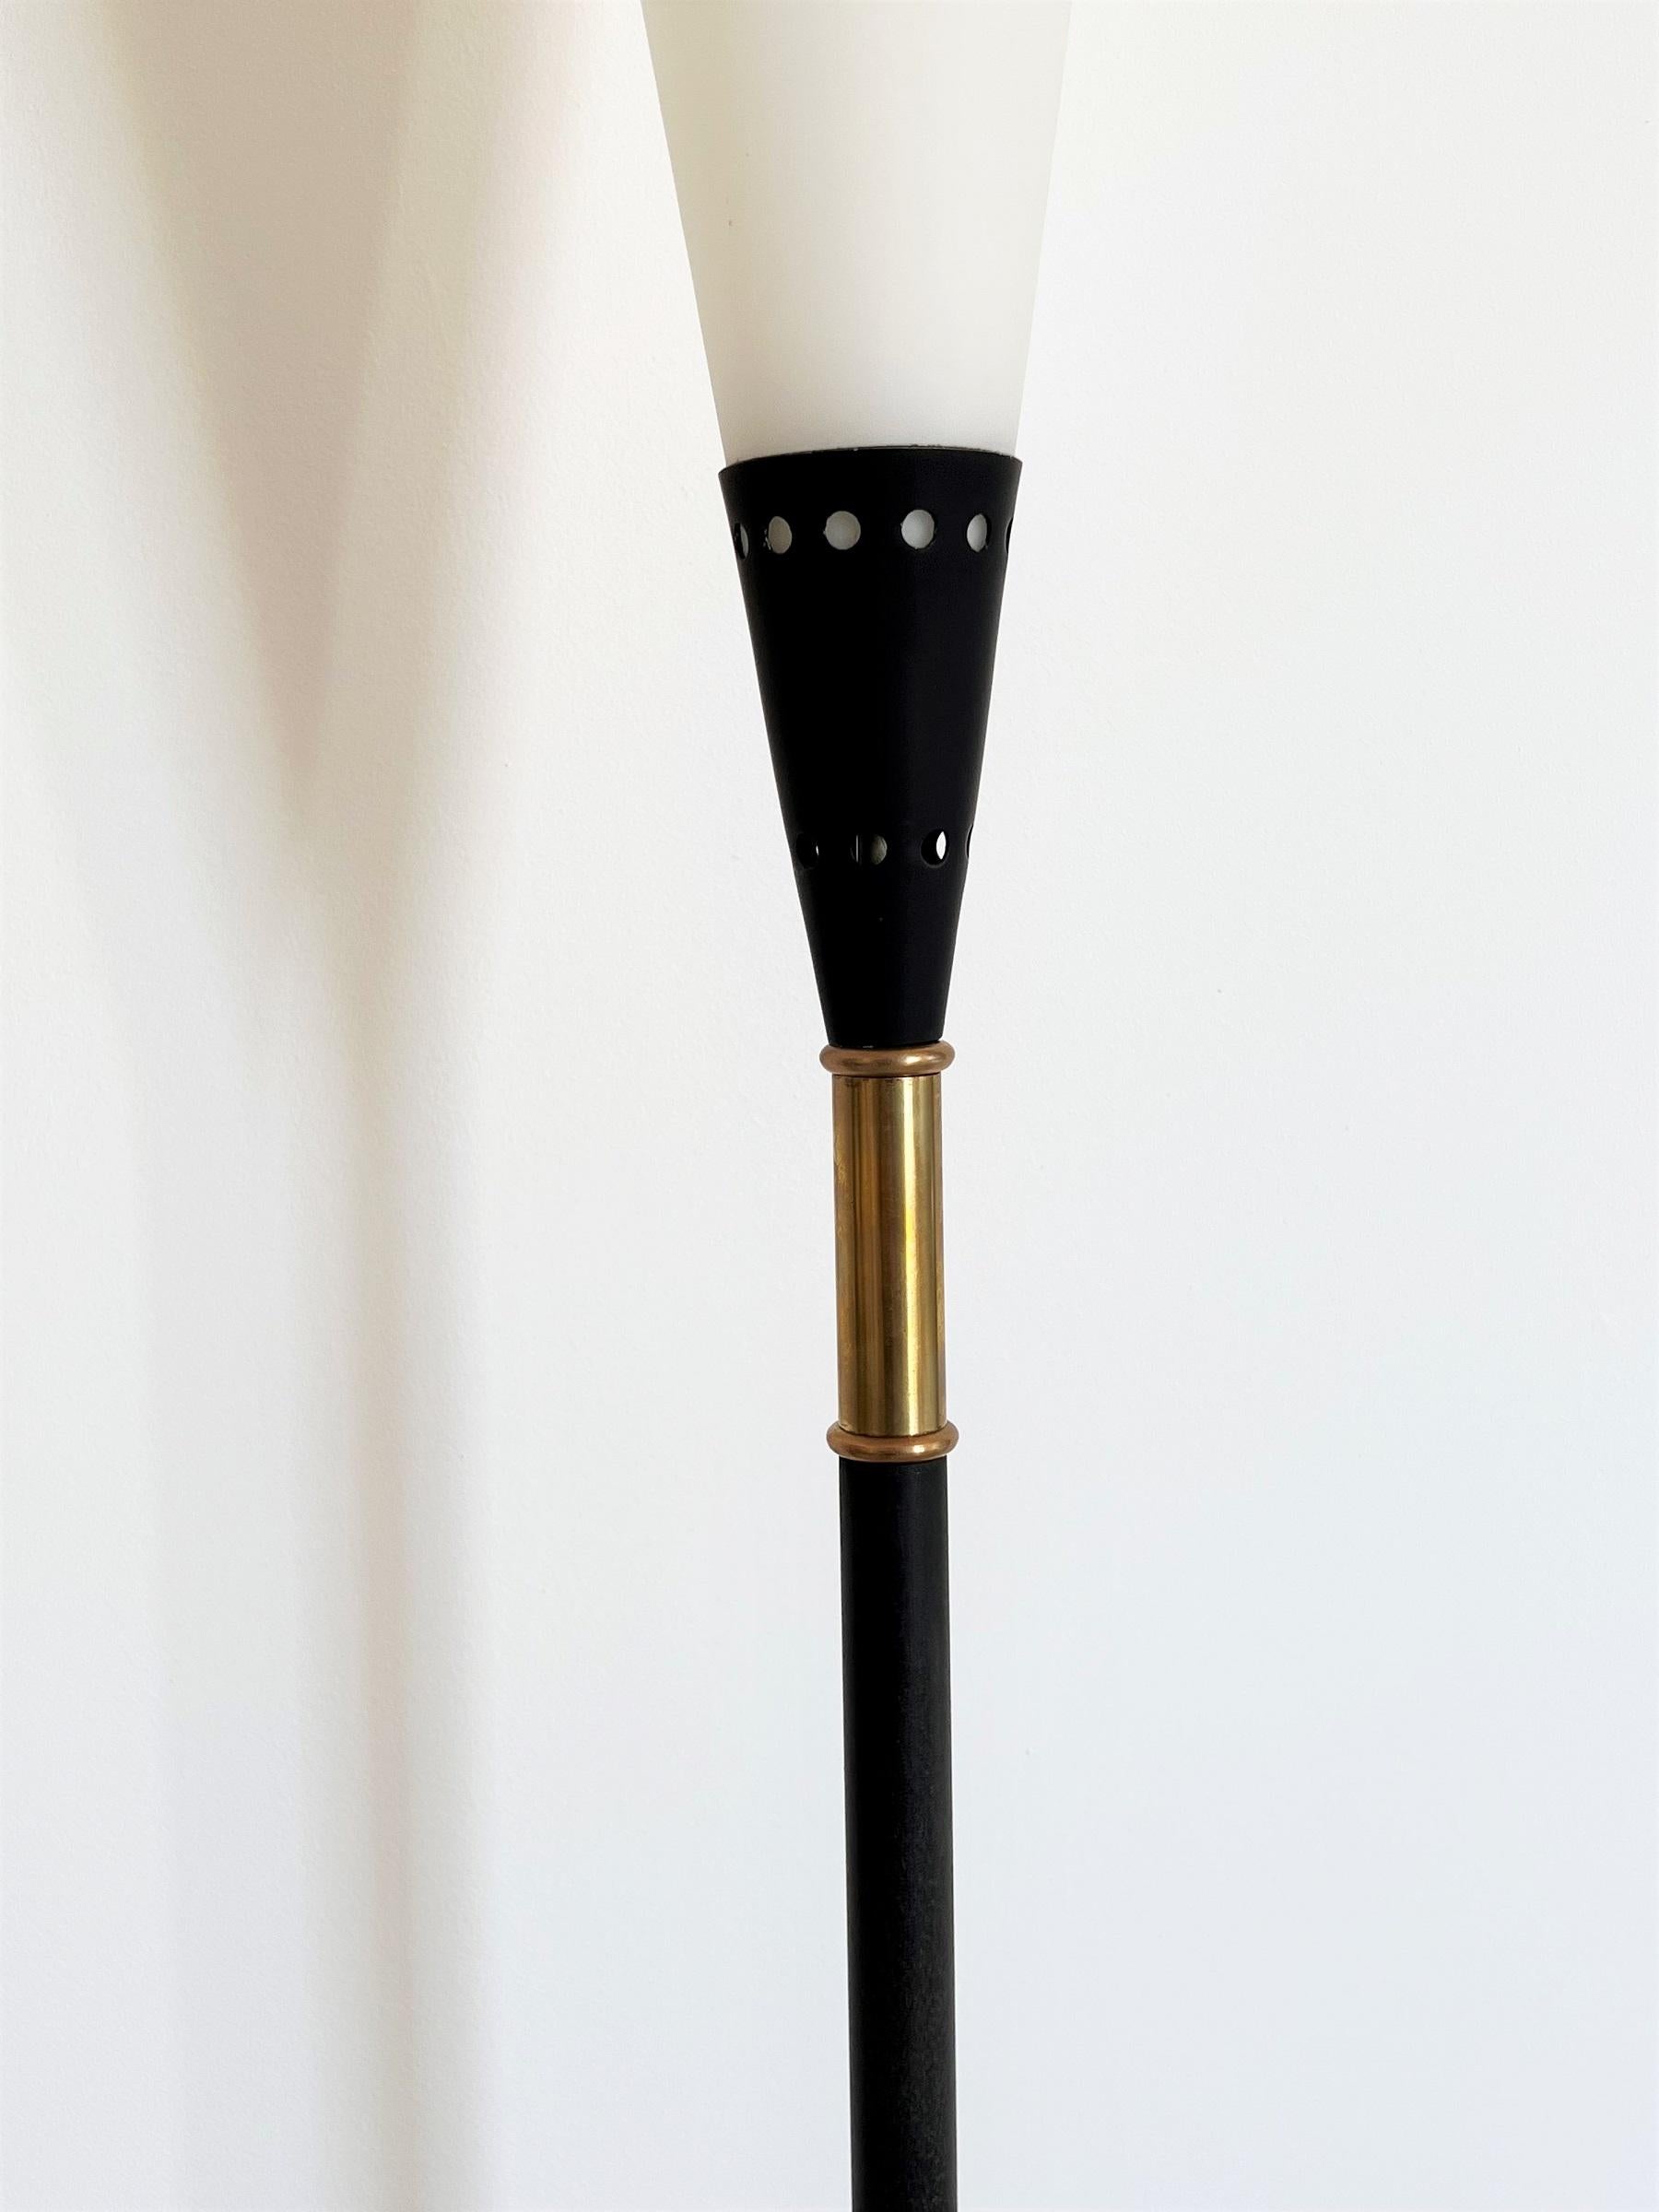 Italian Midcentury Floor Lamp in Glass, Brass and Marble by Reggiani, 1960s For Sale 1